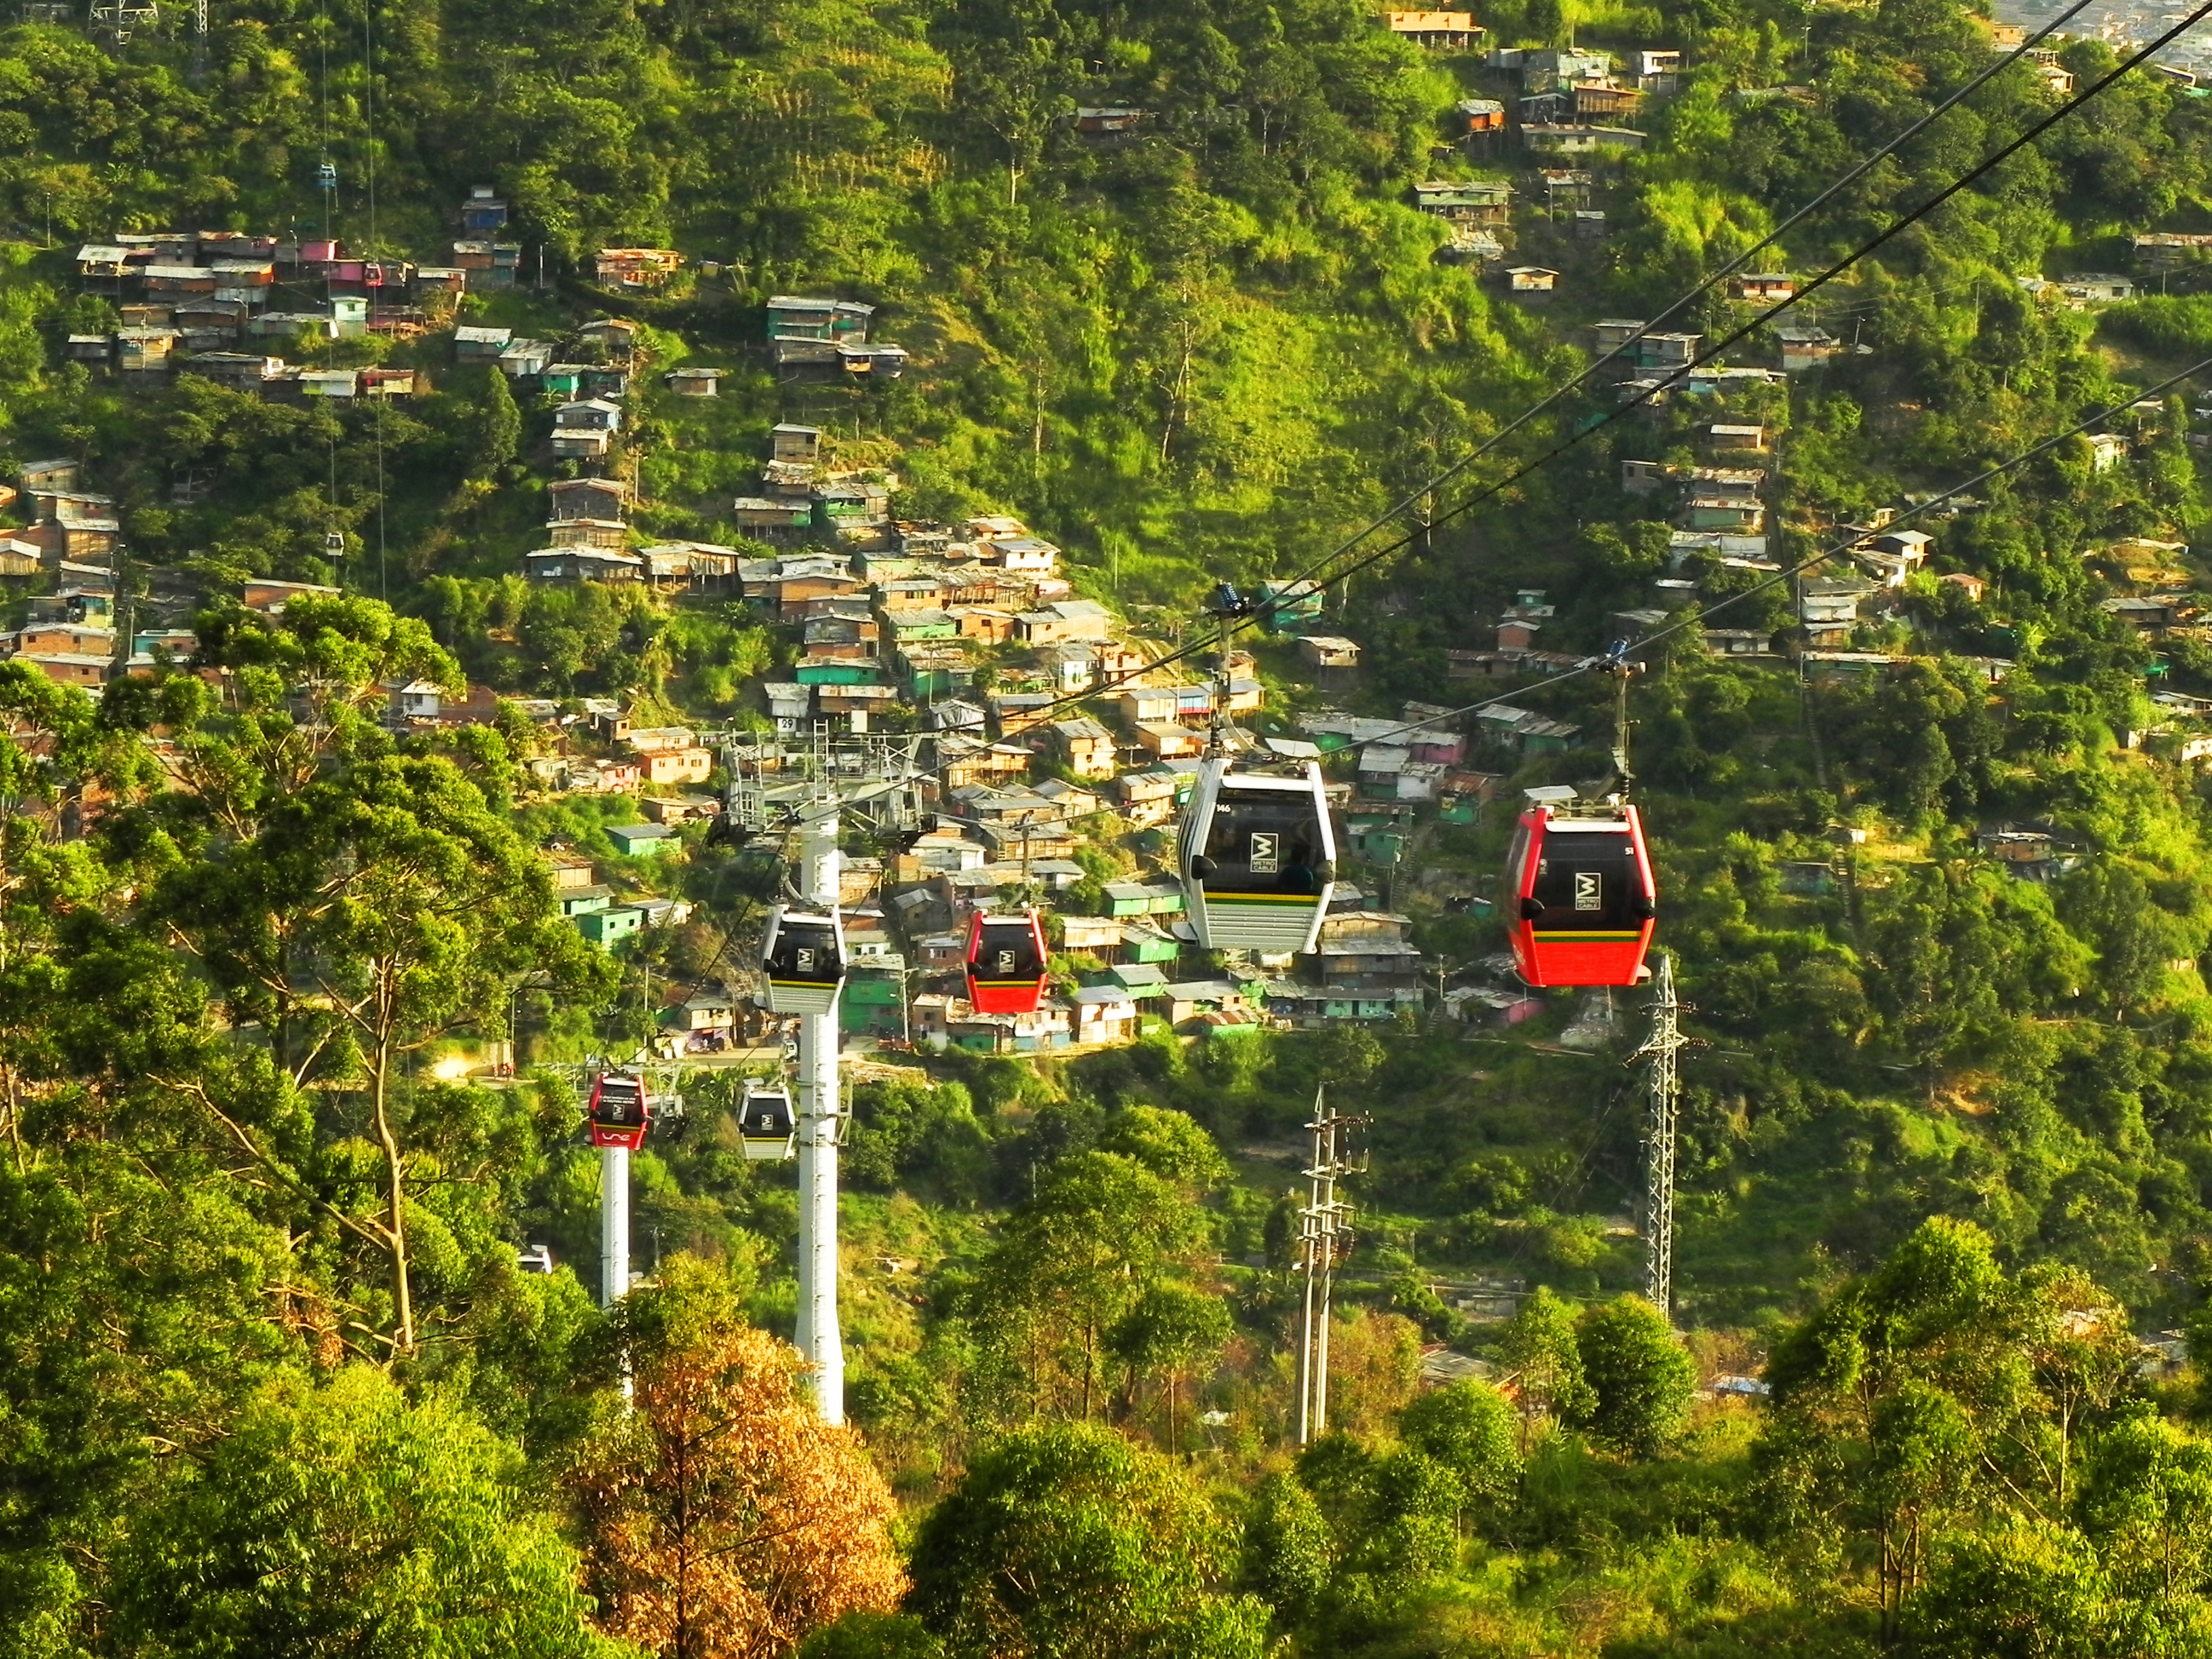 cable cart surrounded trees, medellin, colombia, slum, metrocable